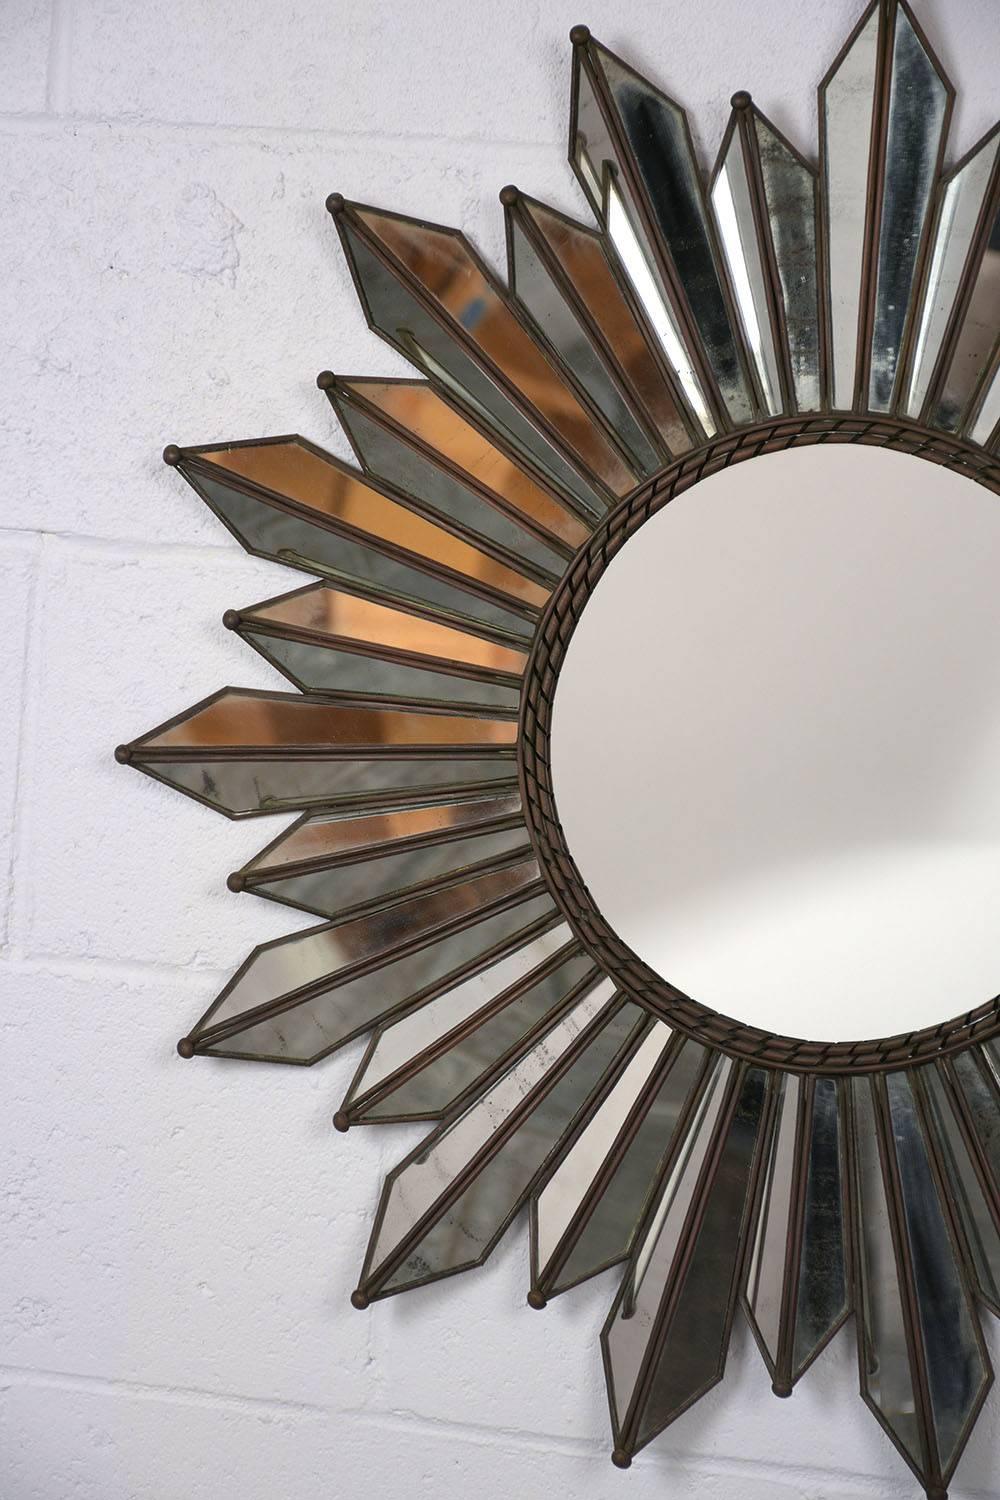 This 1950s Regency style sunburst mirror features a metal frame with geometric mirror accents at varying lengths. The centre mirror is fully reflective in great condition. Surrounding the centre mirror are two twisted metal band accents. This wall